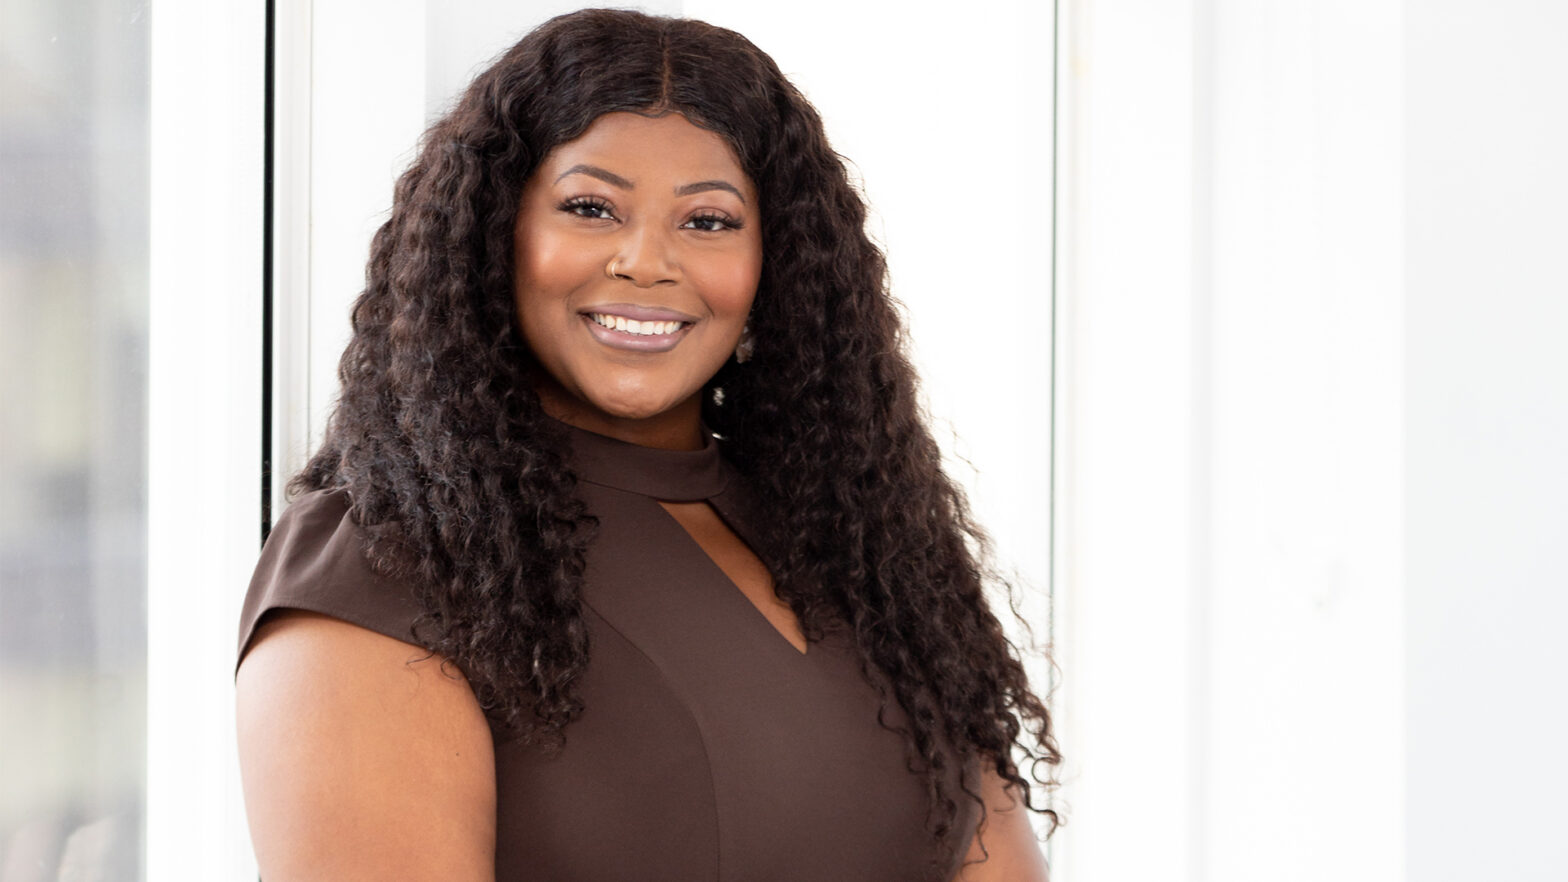 23-Year-Old Ahriana Edwards Lands Her Size-Inclusive Footwear Brand In Macy's Within 1 Year Of Business